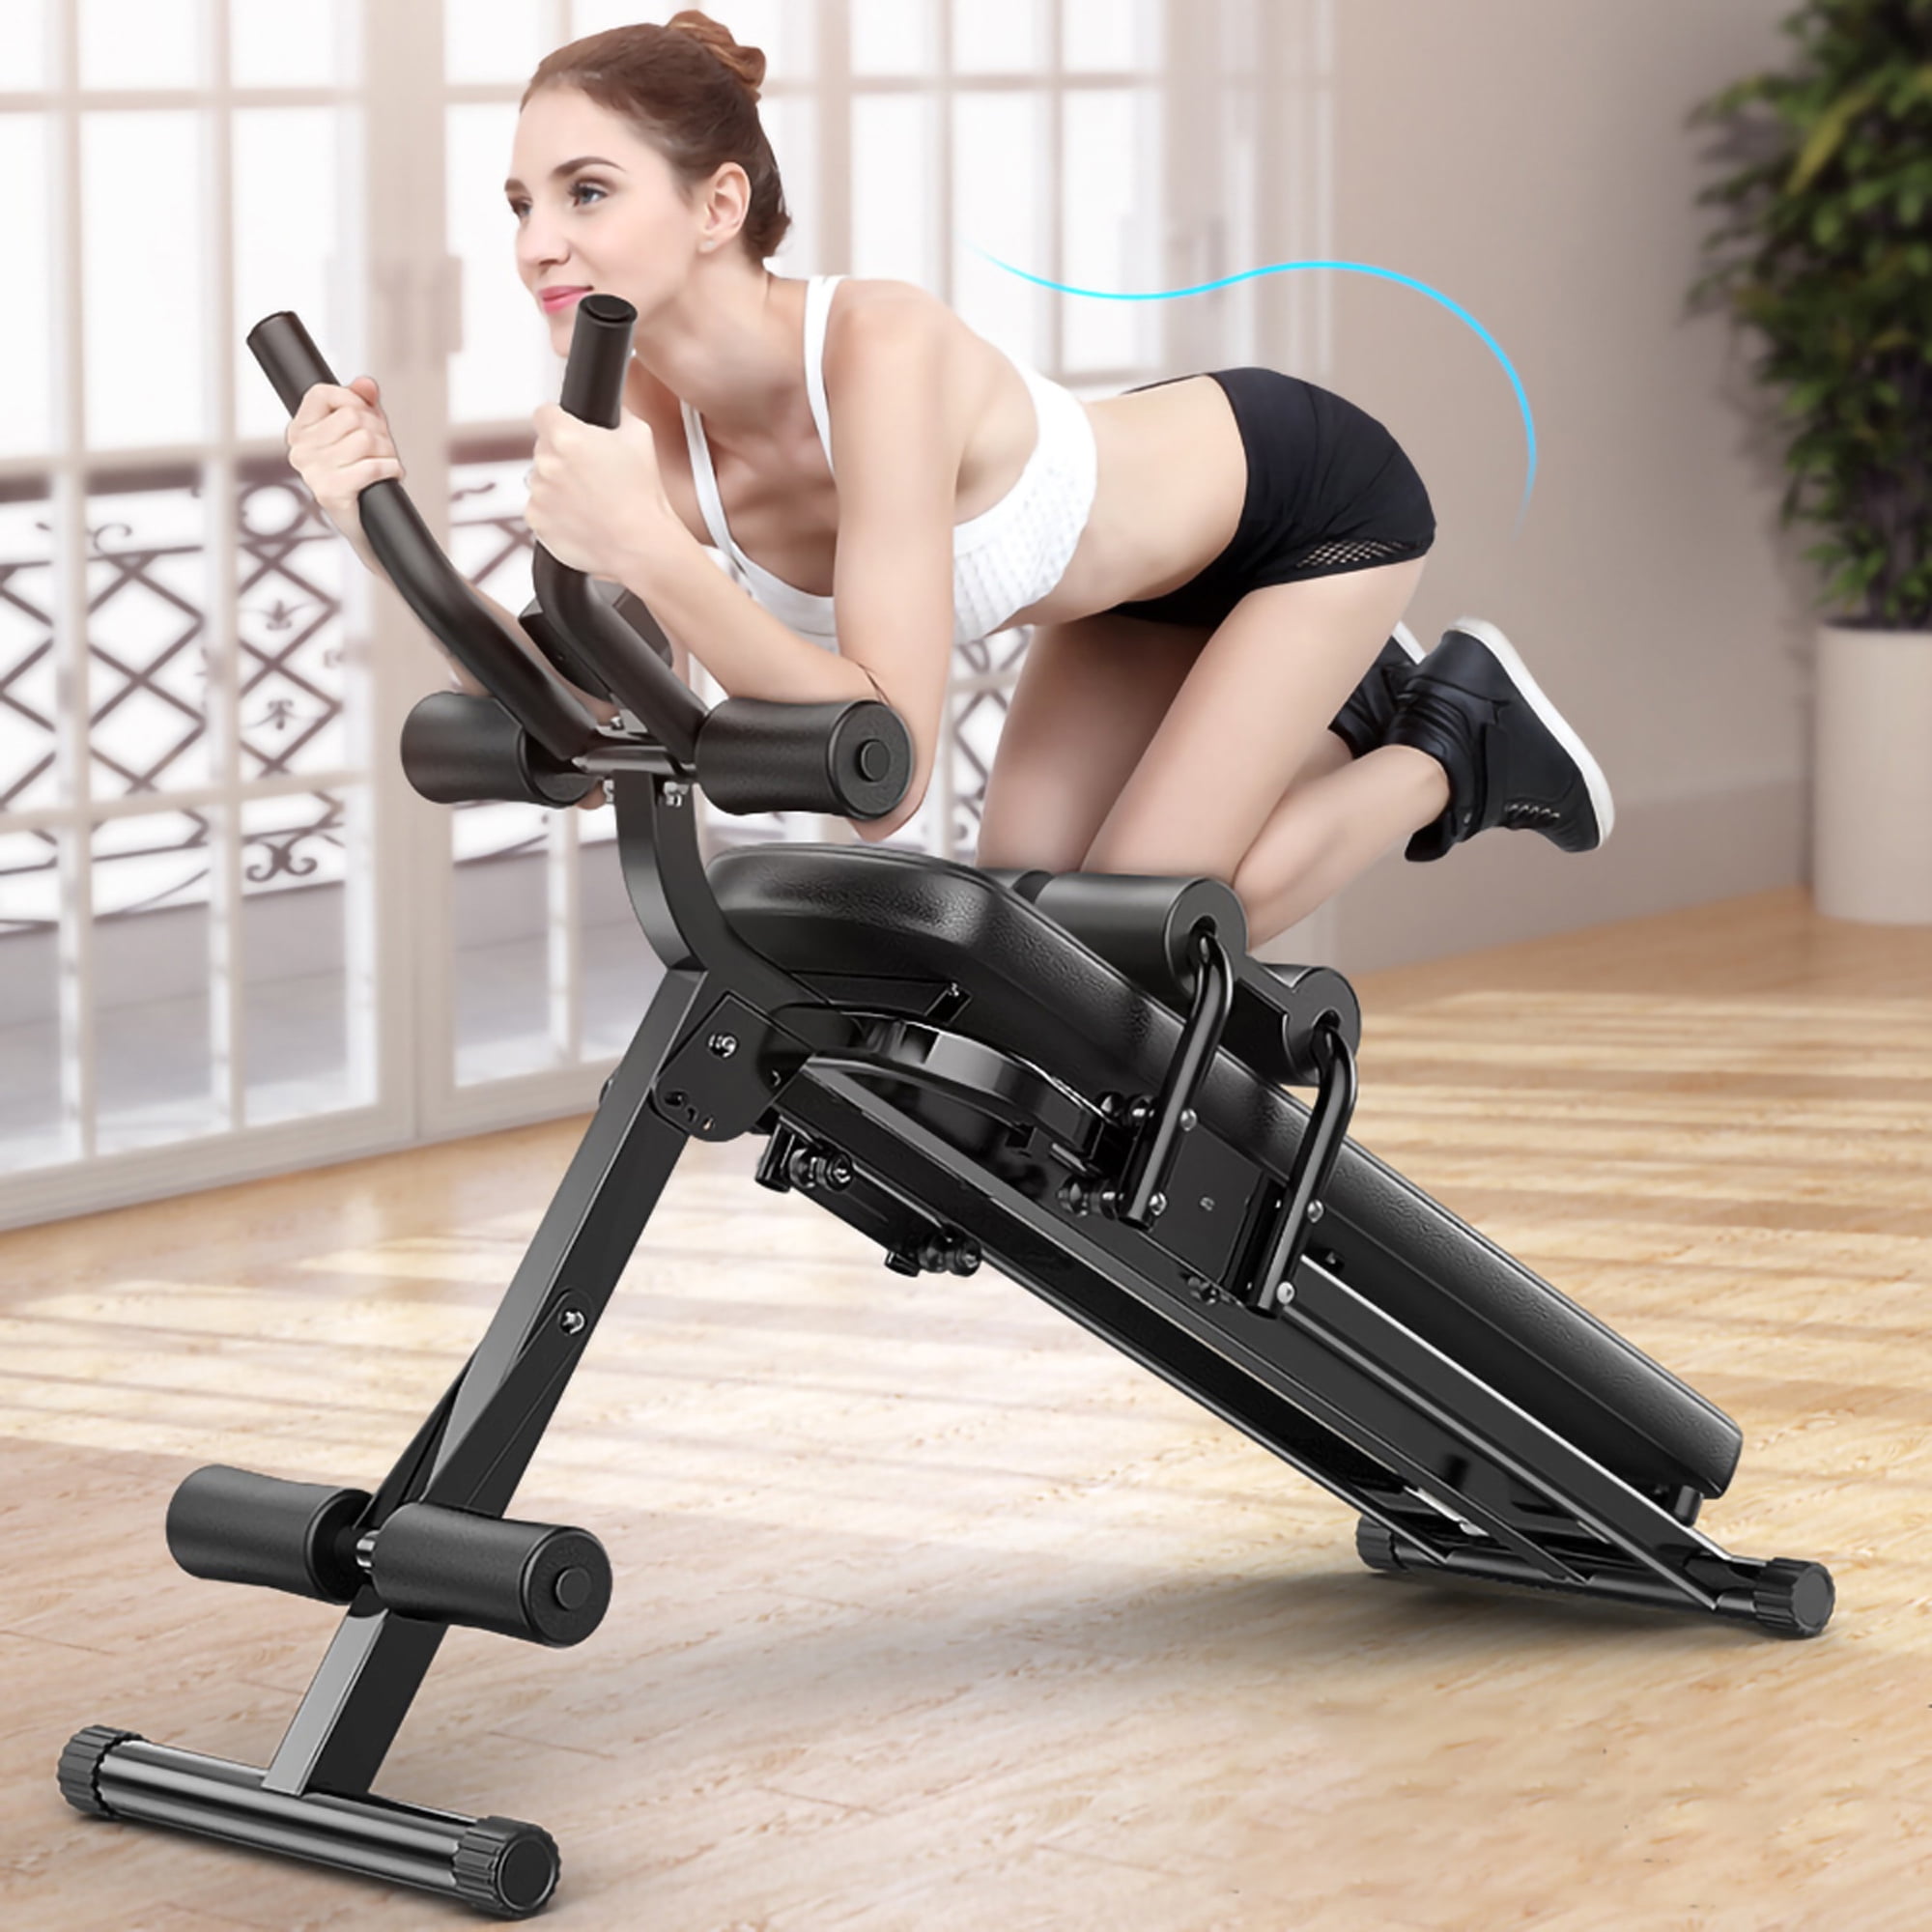 2 In 1 Foldable Adjustable LCD Sit Up Bench Abdominal Trainer Home Fitness 